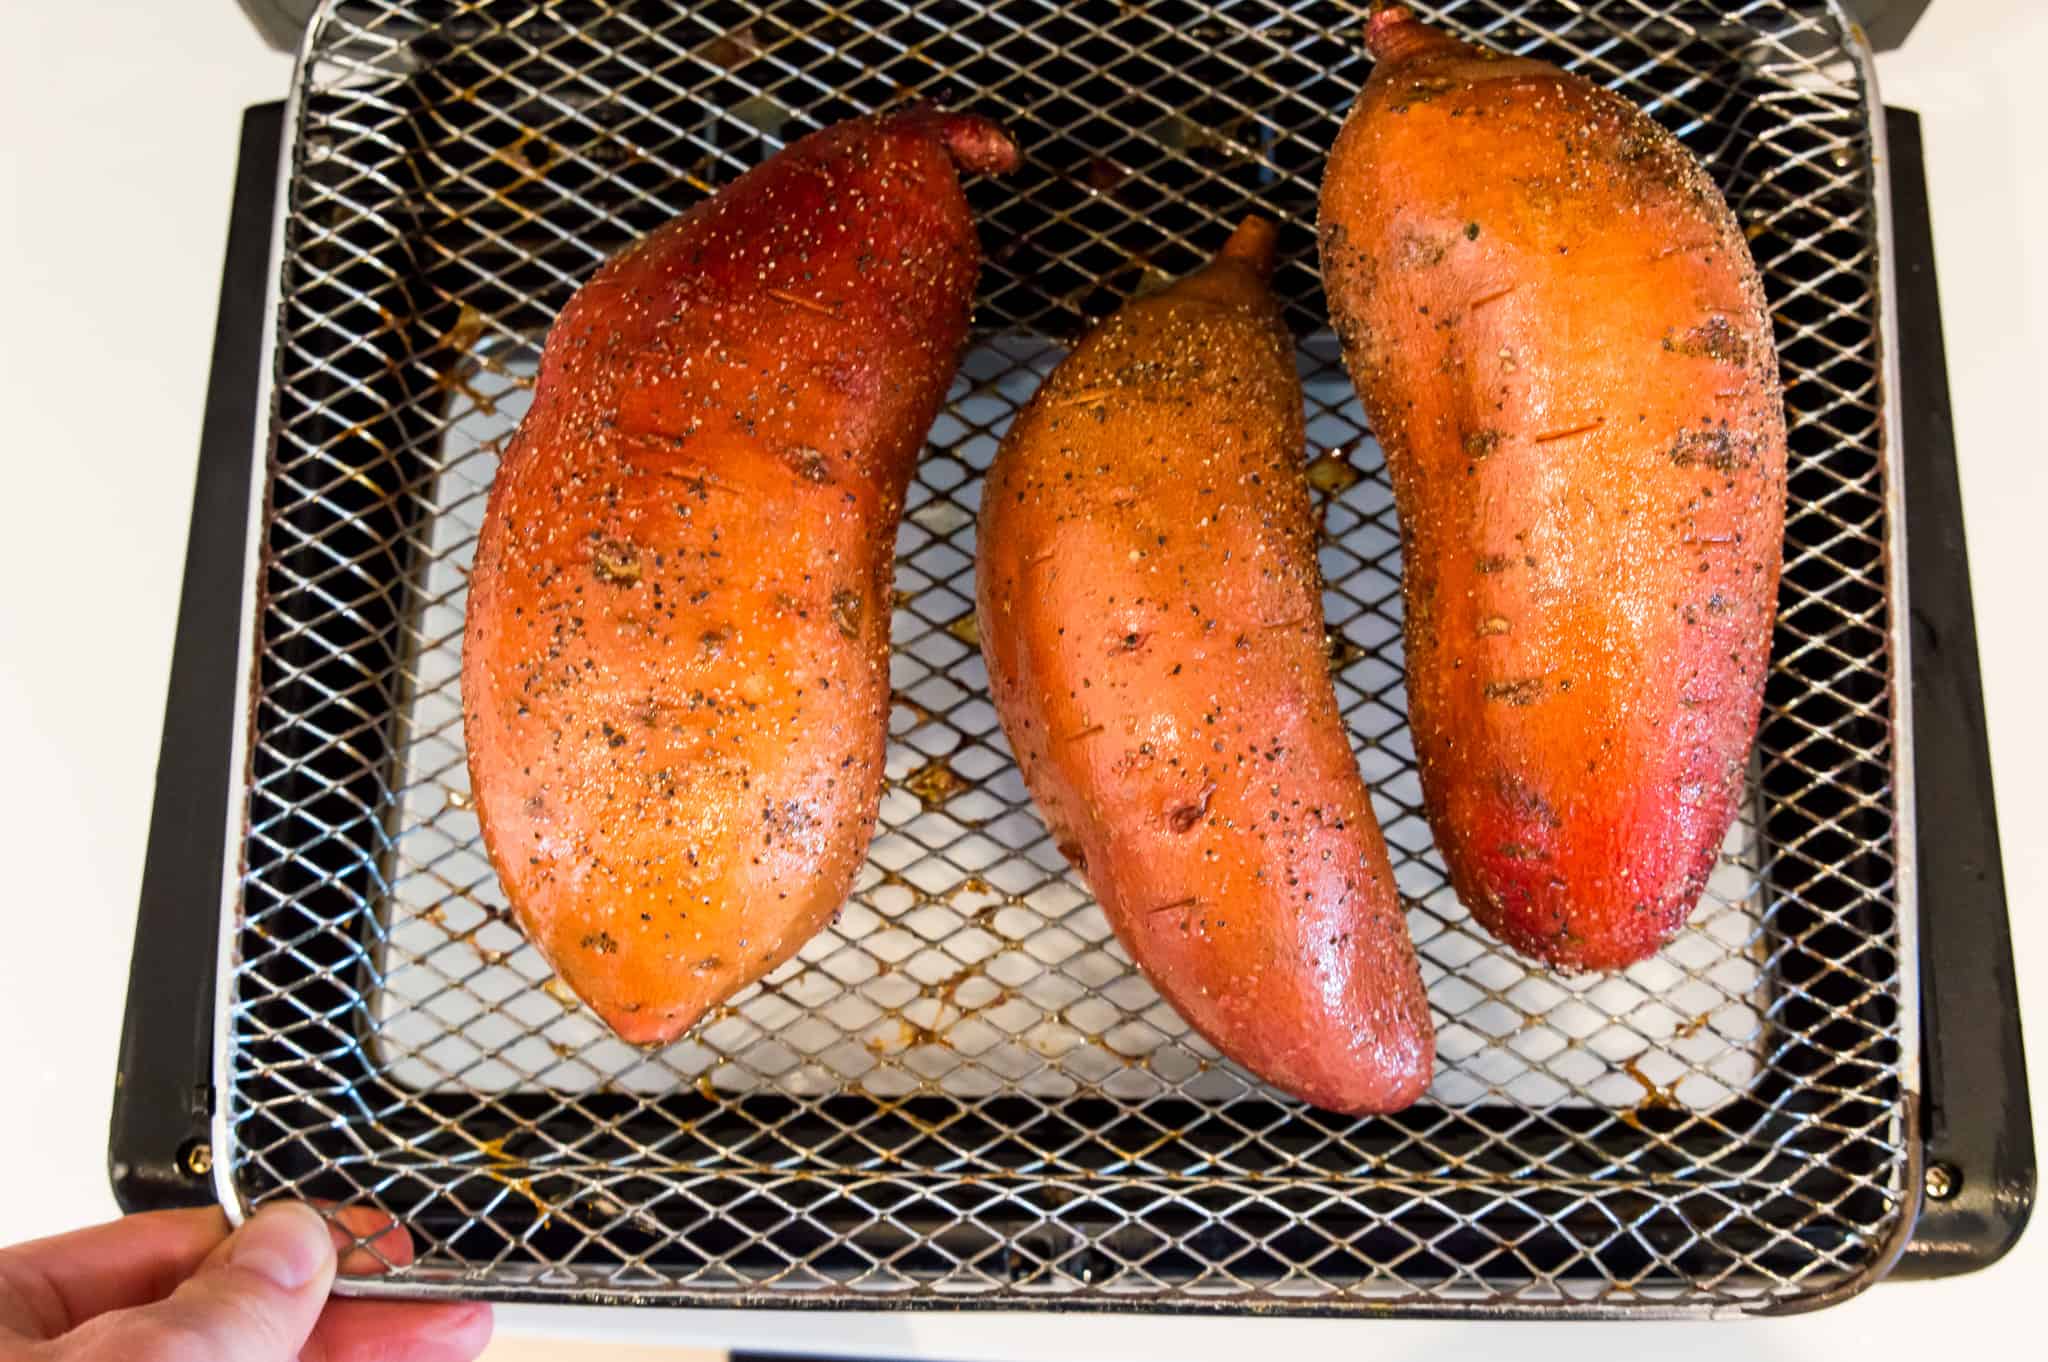 Three whole sweet potatoes on the rack of an air fryer oven.